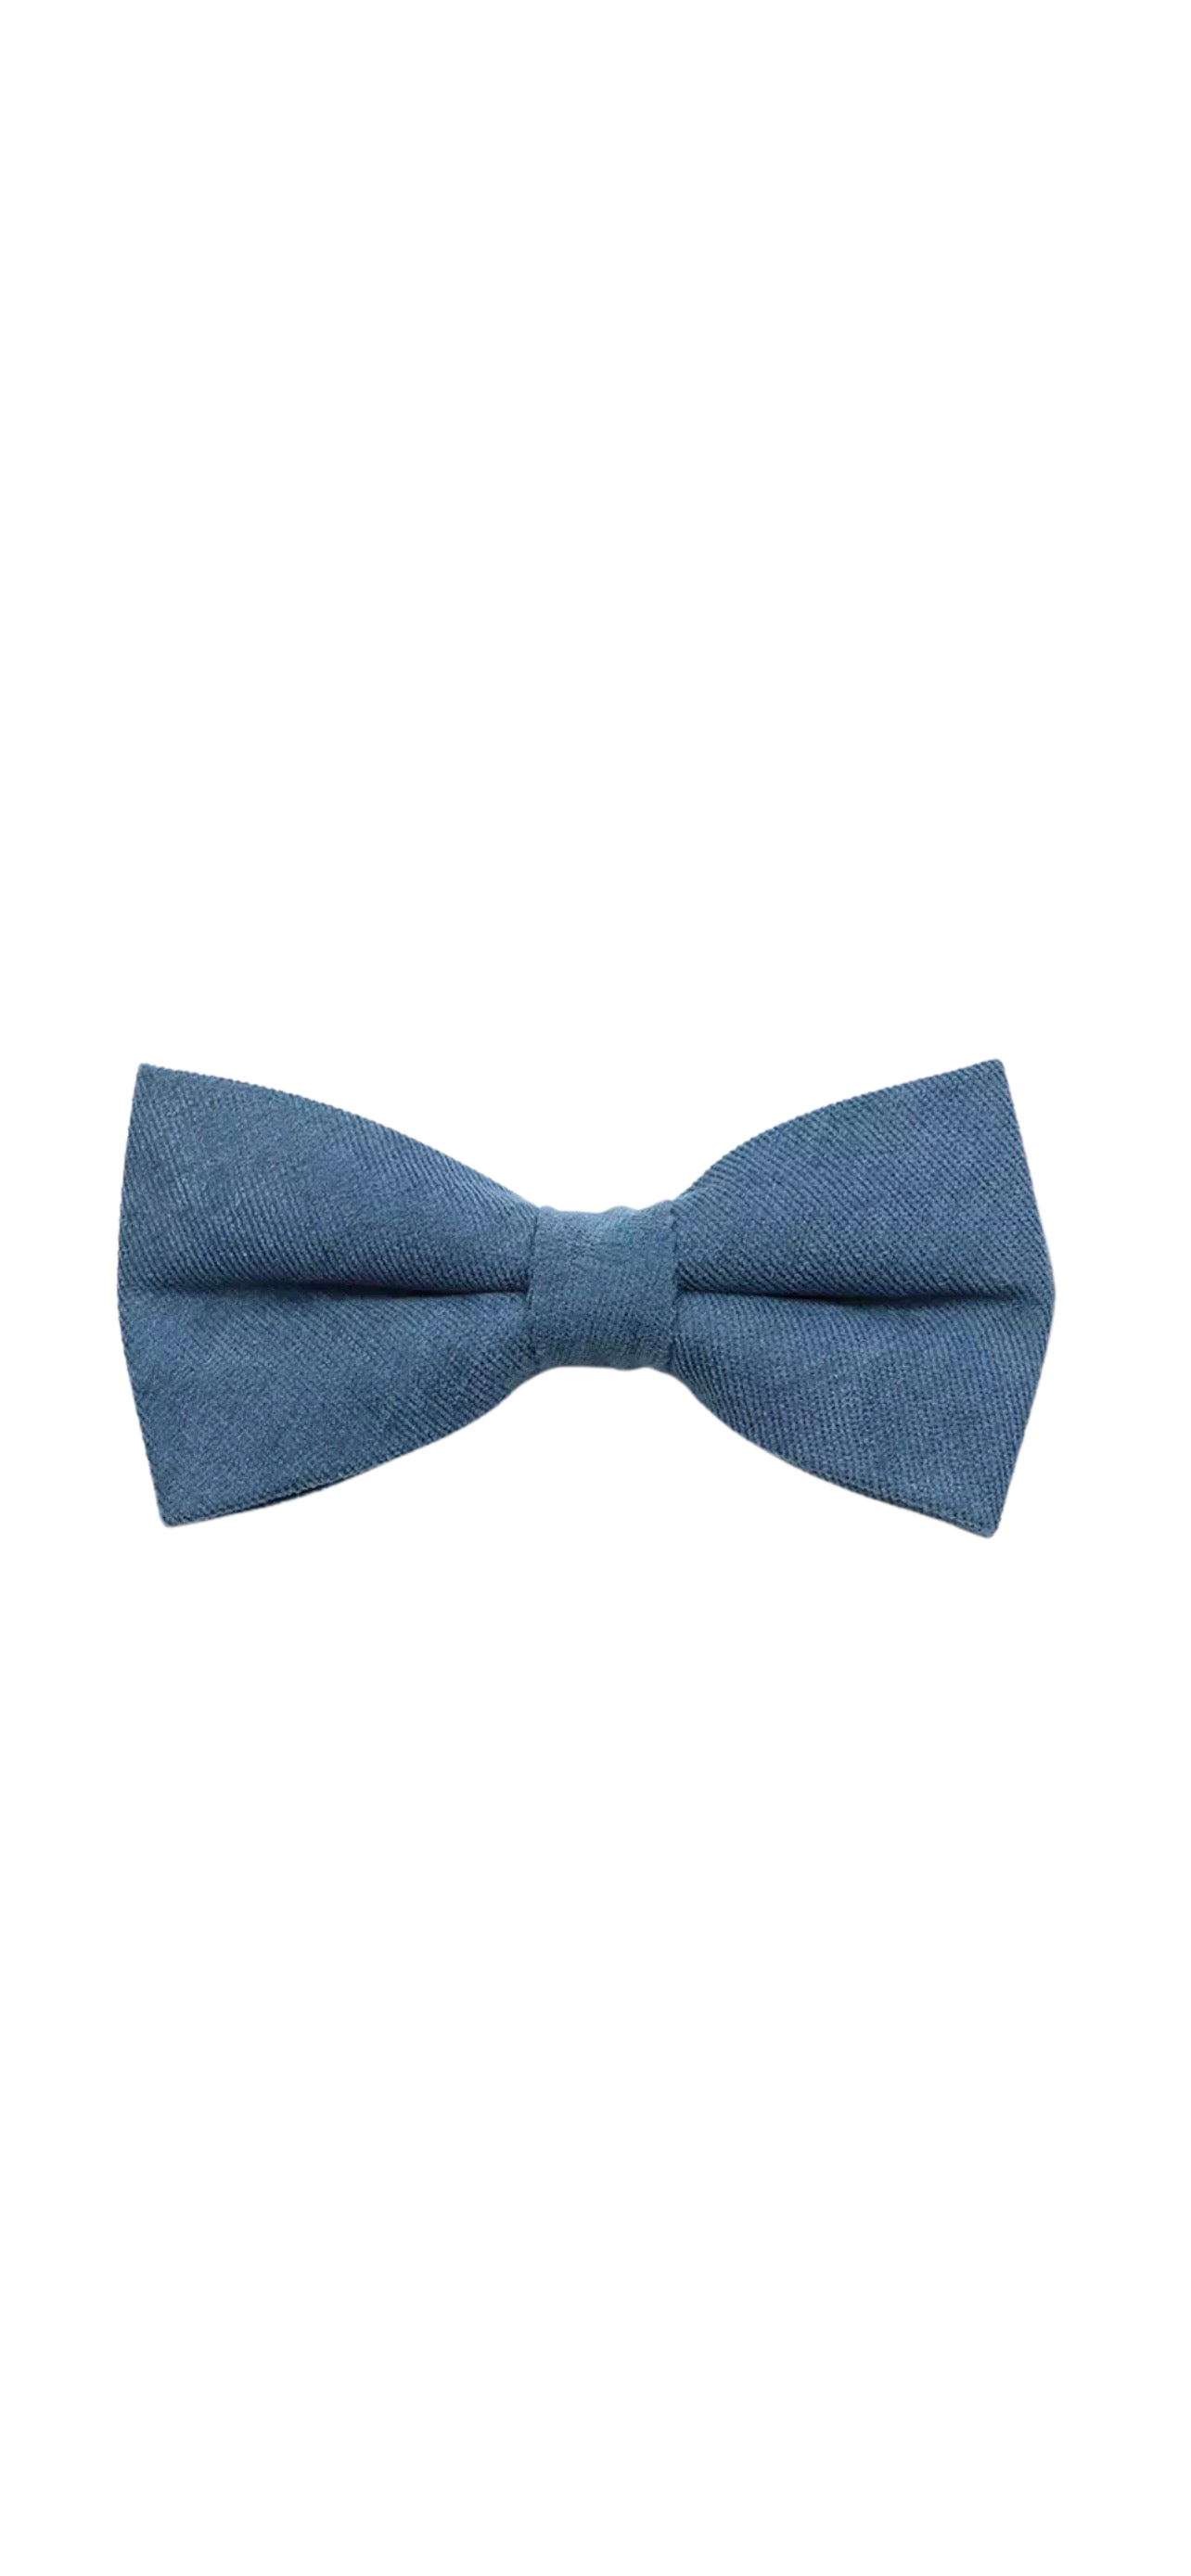 POPPY adult Floral Pre-be Tied Bow Tie-Strap is 32CM Long (10-18 Inches) Adult bow tie with adjustable strap (Average men neck size is 15) Color: Blue Great for: Groom Groomsmen Wedding Shoots Formal Prom Fancy Parties Gifts and presents-Mytieshop